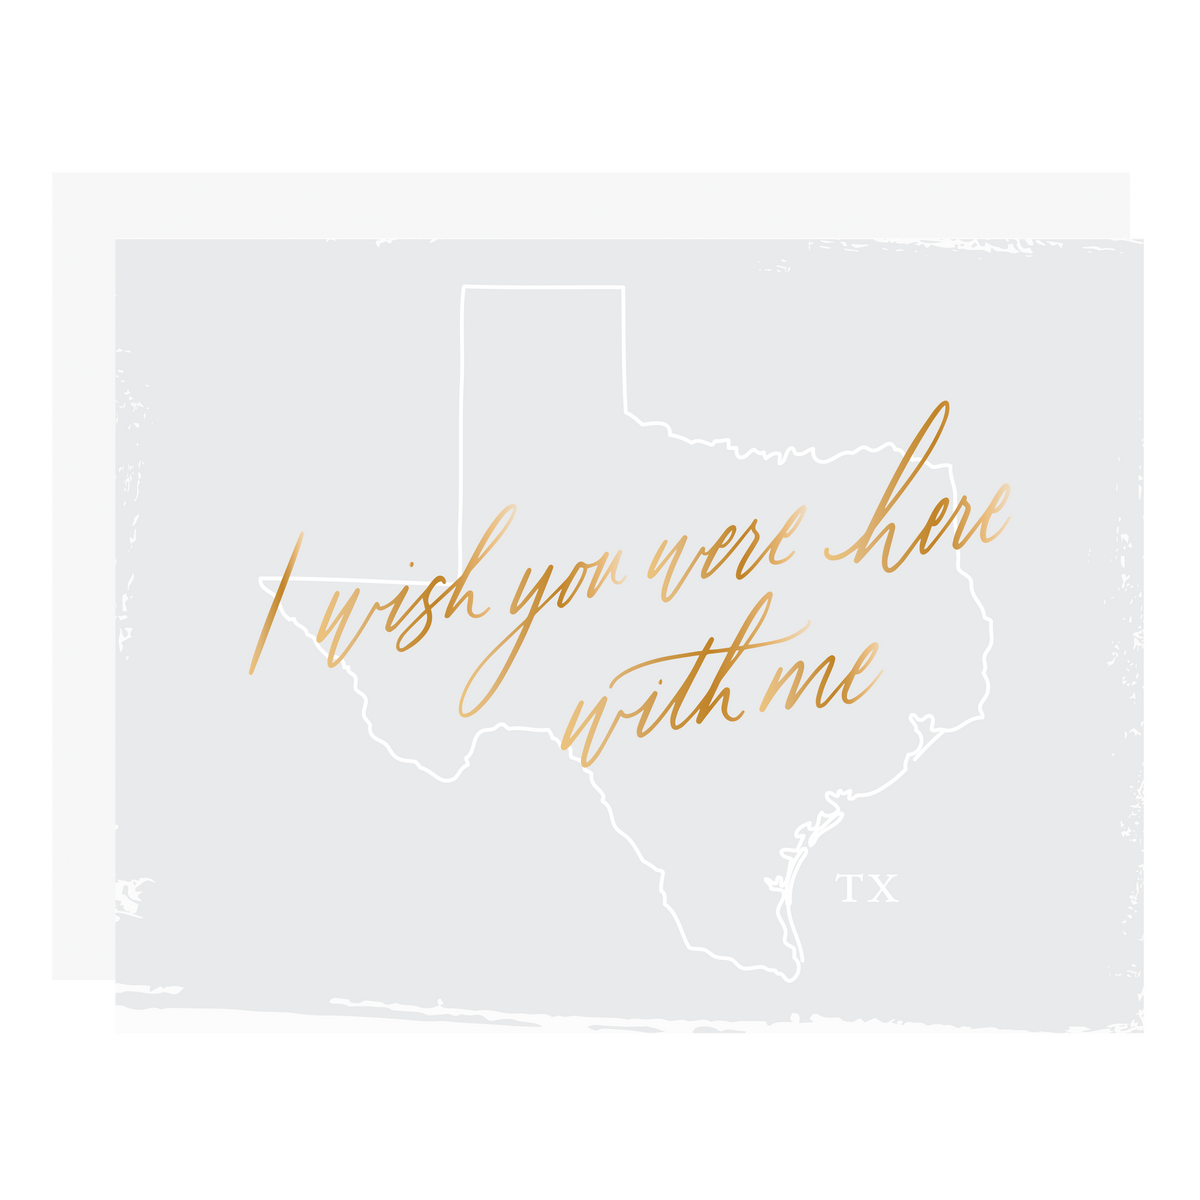 &quot;Wish You Were Here With Me - Texas&quot;, letterpress printed by hand with gold foil. 